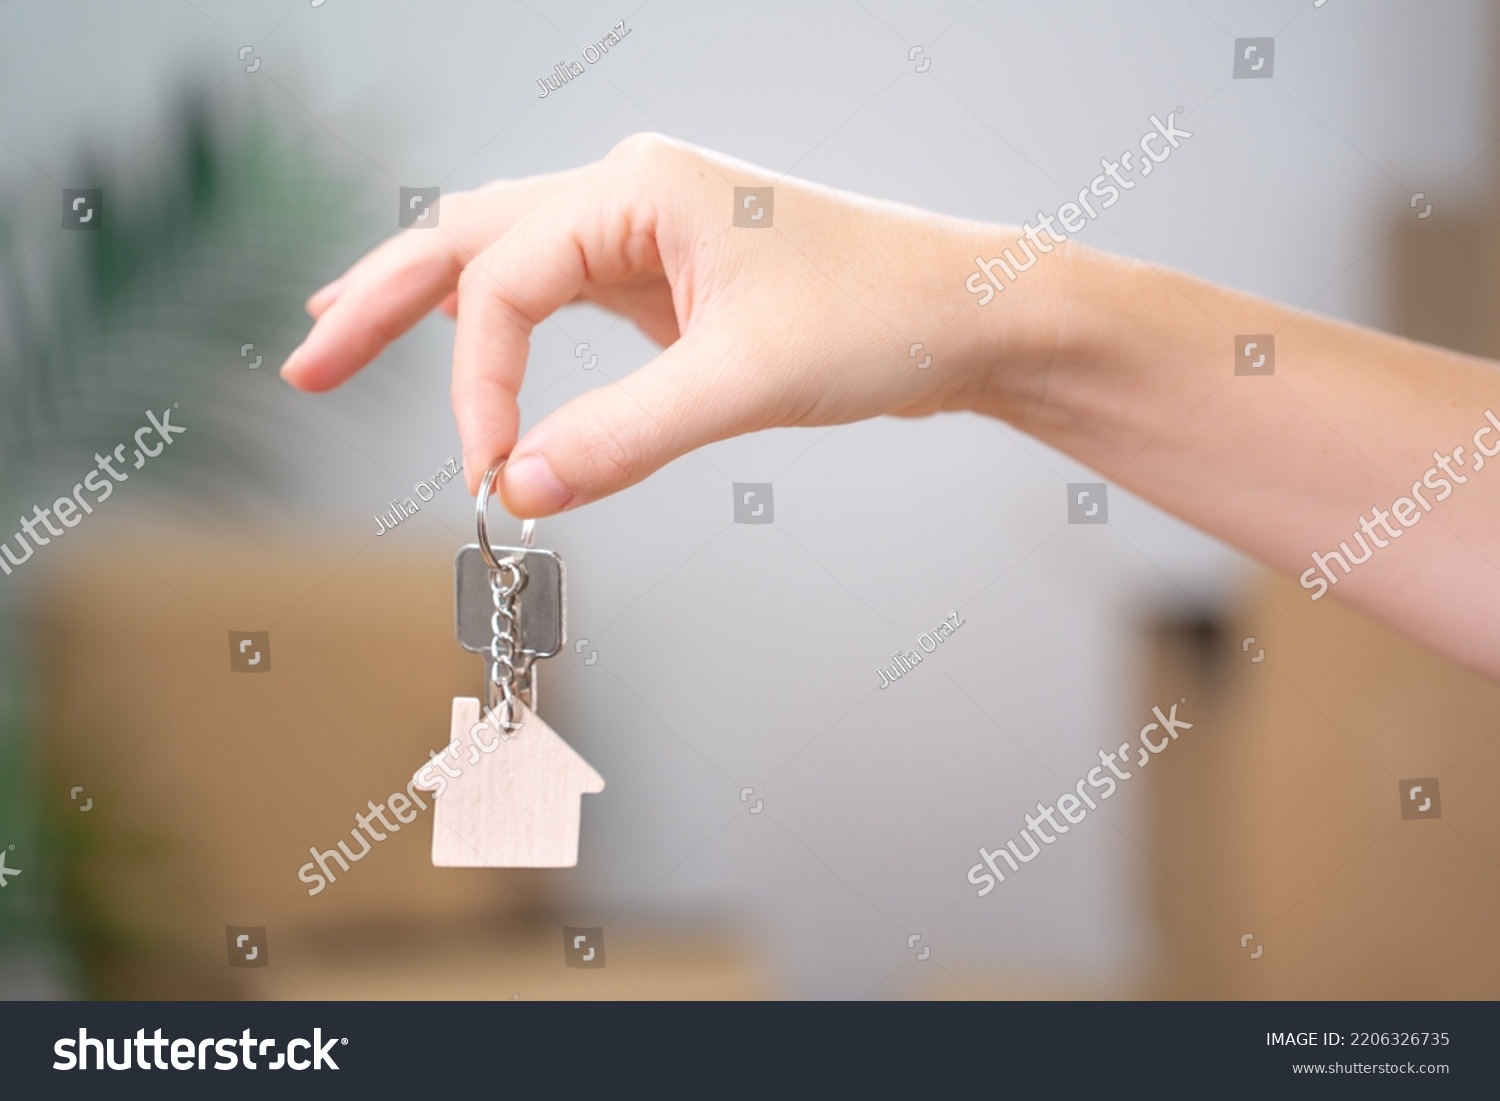 Female Hand Holding House Keys Inside Empty Room with Boxes Banner. Real estate agent handing over house keys in hand. Close-up view of keys from new home on cardboard box during relocation. #2206326735